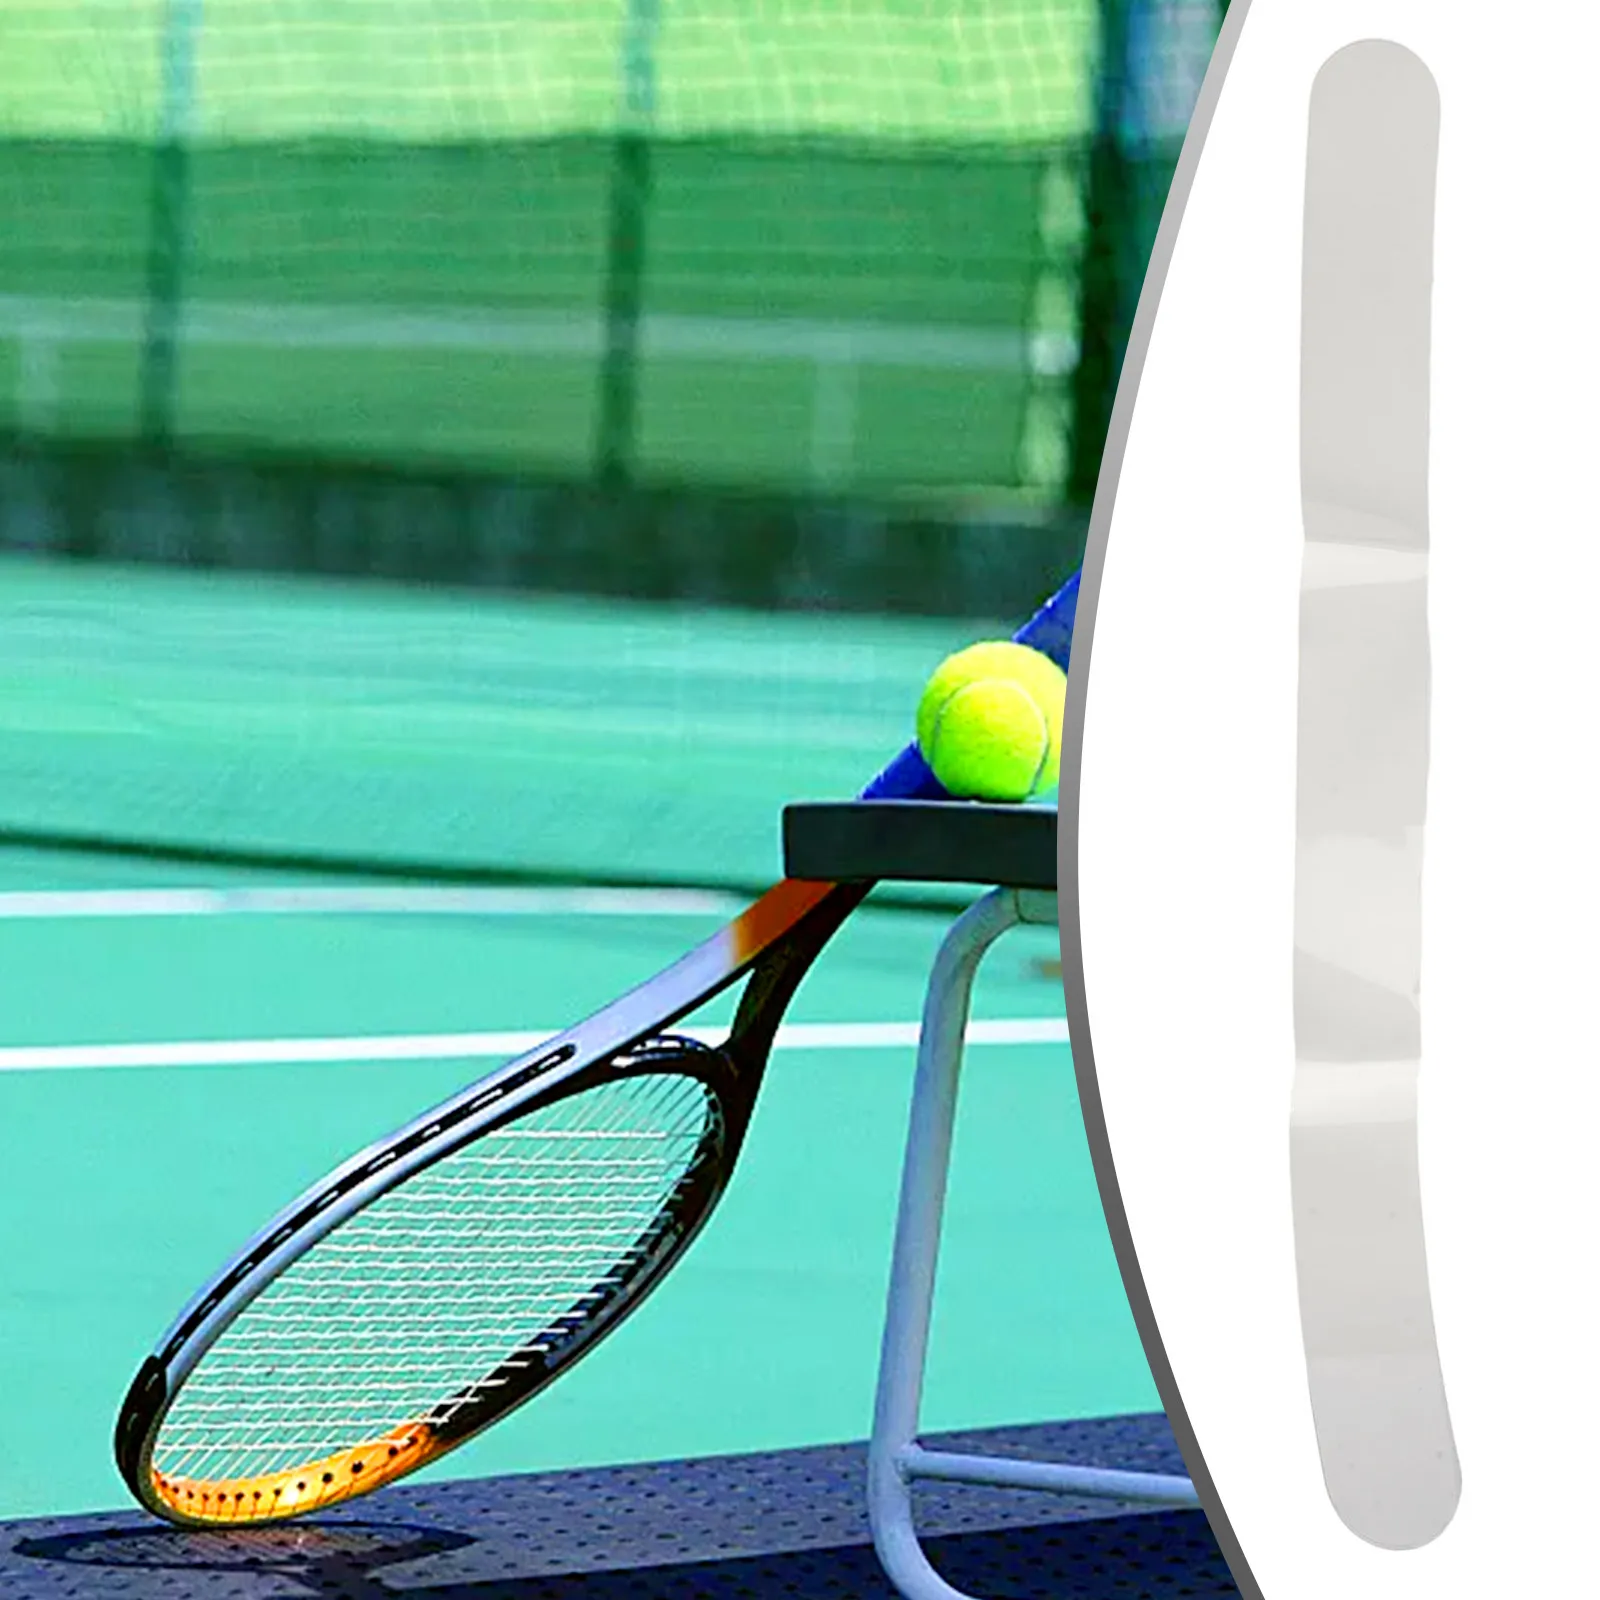 

Racket Head Sticker Racket Paddle Tape Reduce Friction Tape Protection Tape Reusable TPU Material 37*3.5*0.66cm